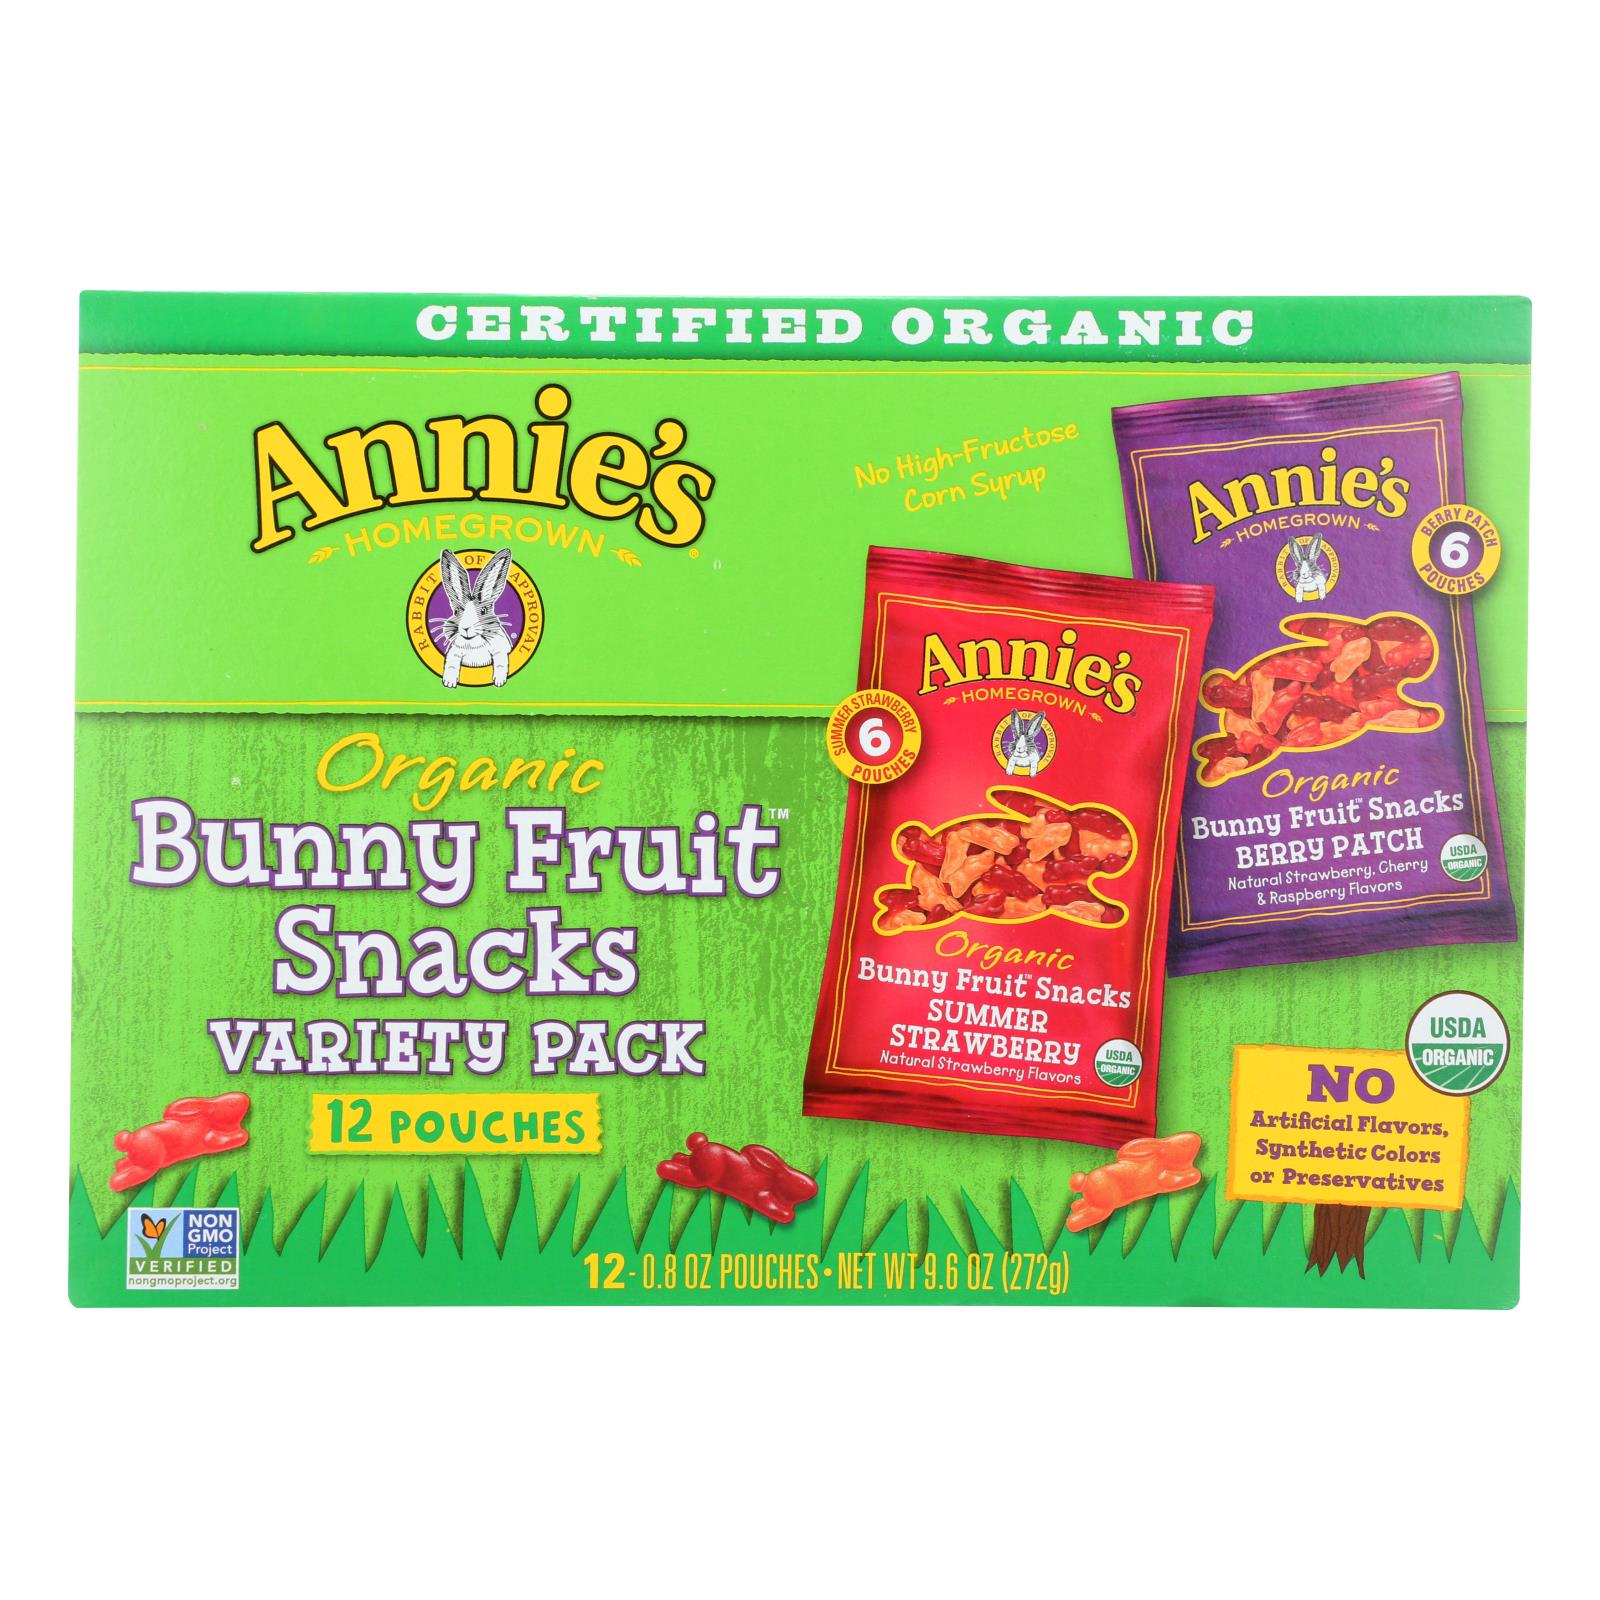 Annie'S Homegrown, Annie's Homegrown Organic Bunny Fruit Snacks Variety Pack - Case of 12 - 9.6 oz. (Pack of 12)